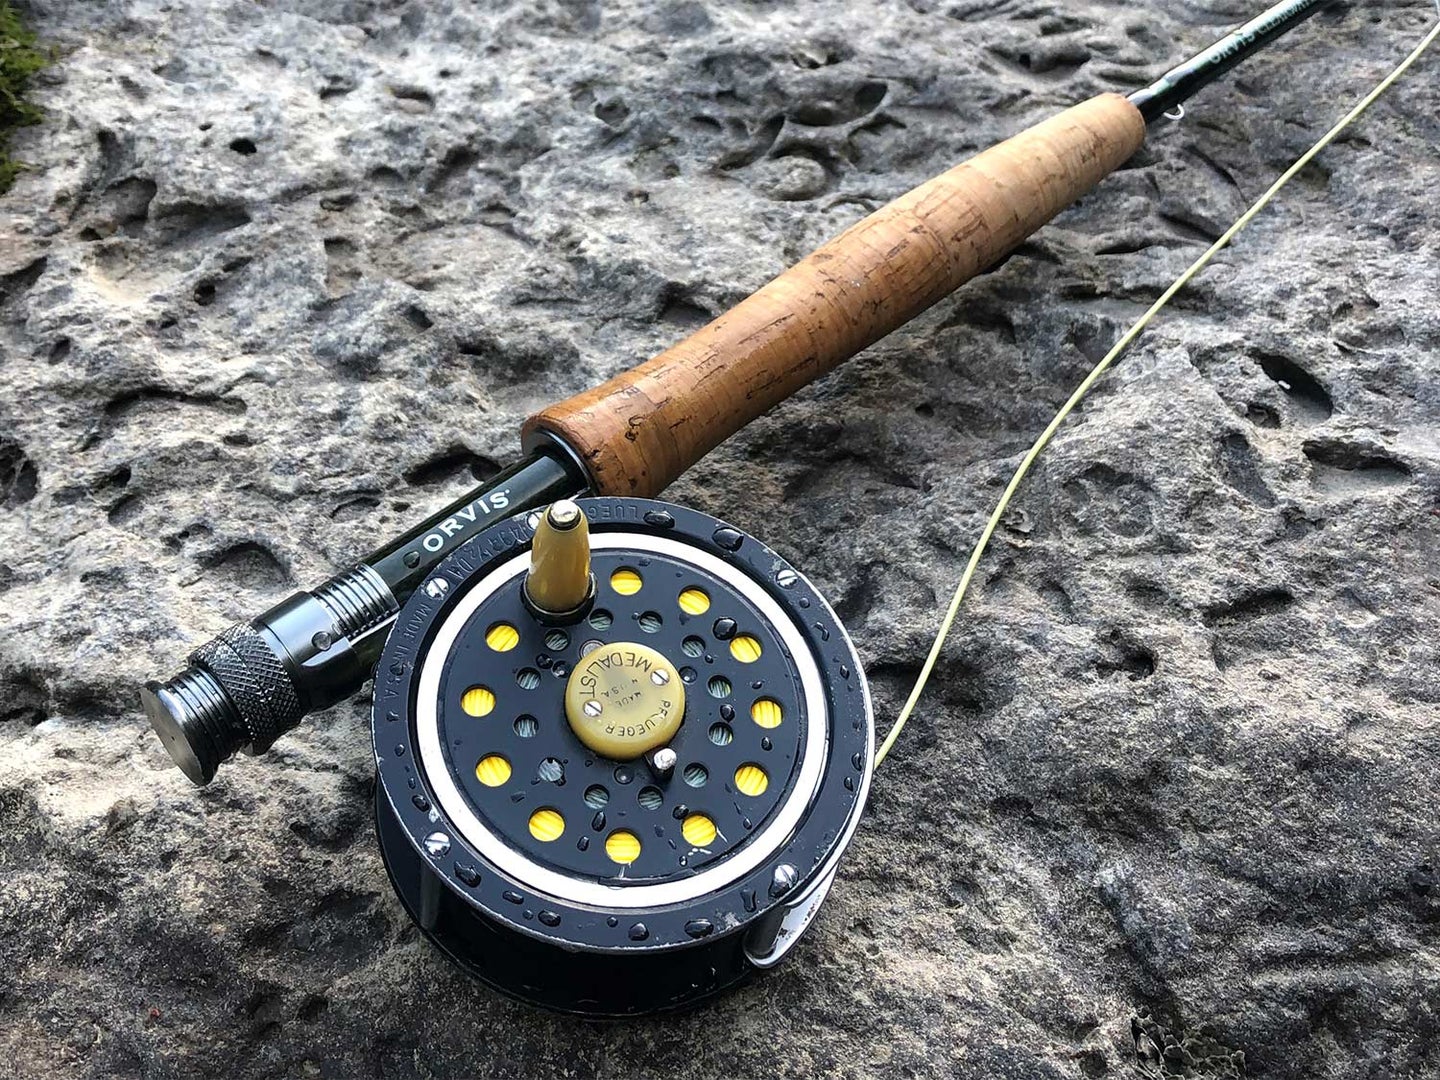 An Orvis reel and Pflueger fly reel on a stone by the water.